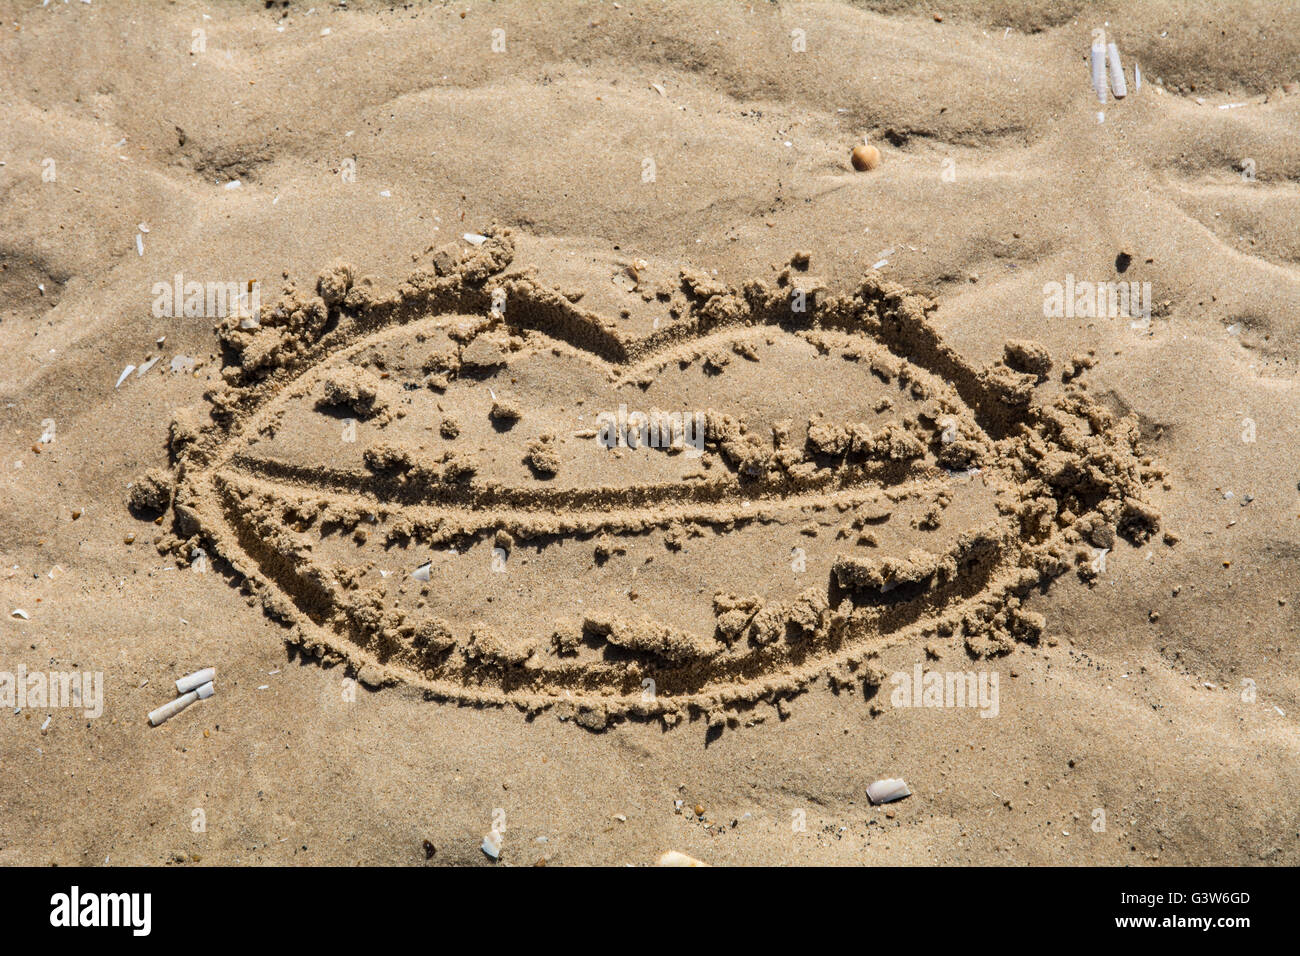 A pair of lips drawn in the sand. Stock Photo